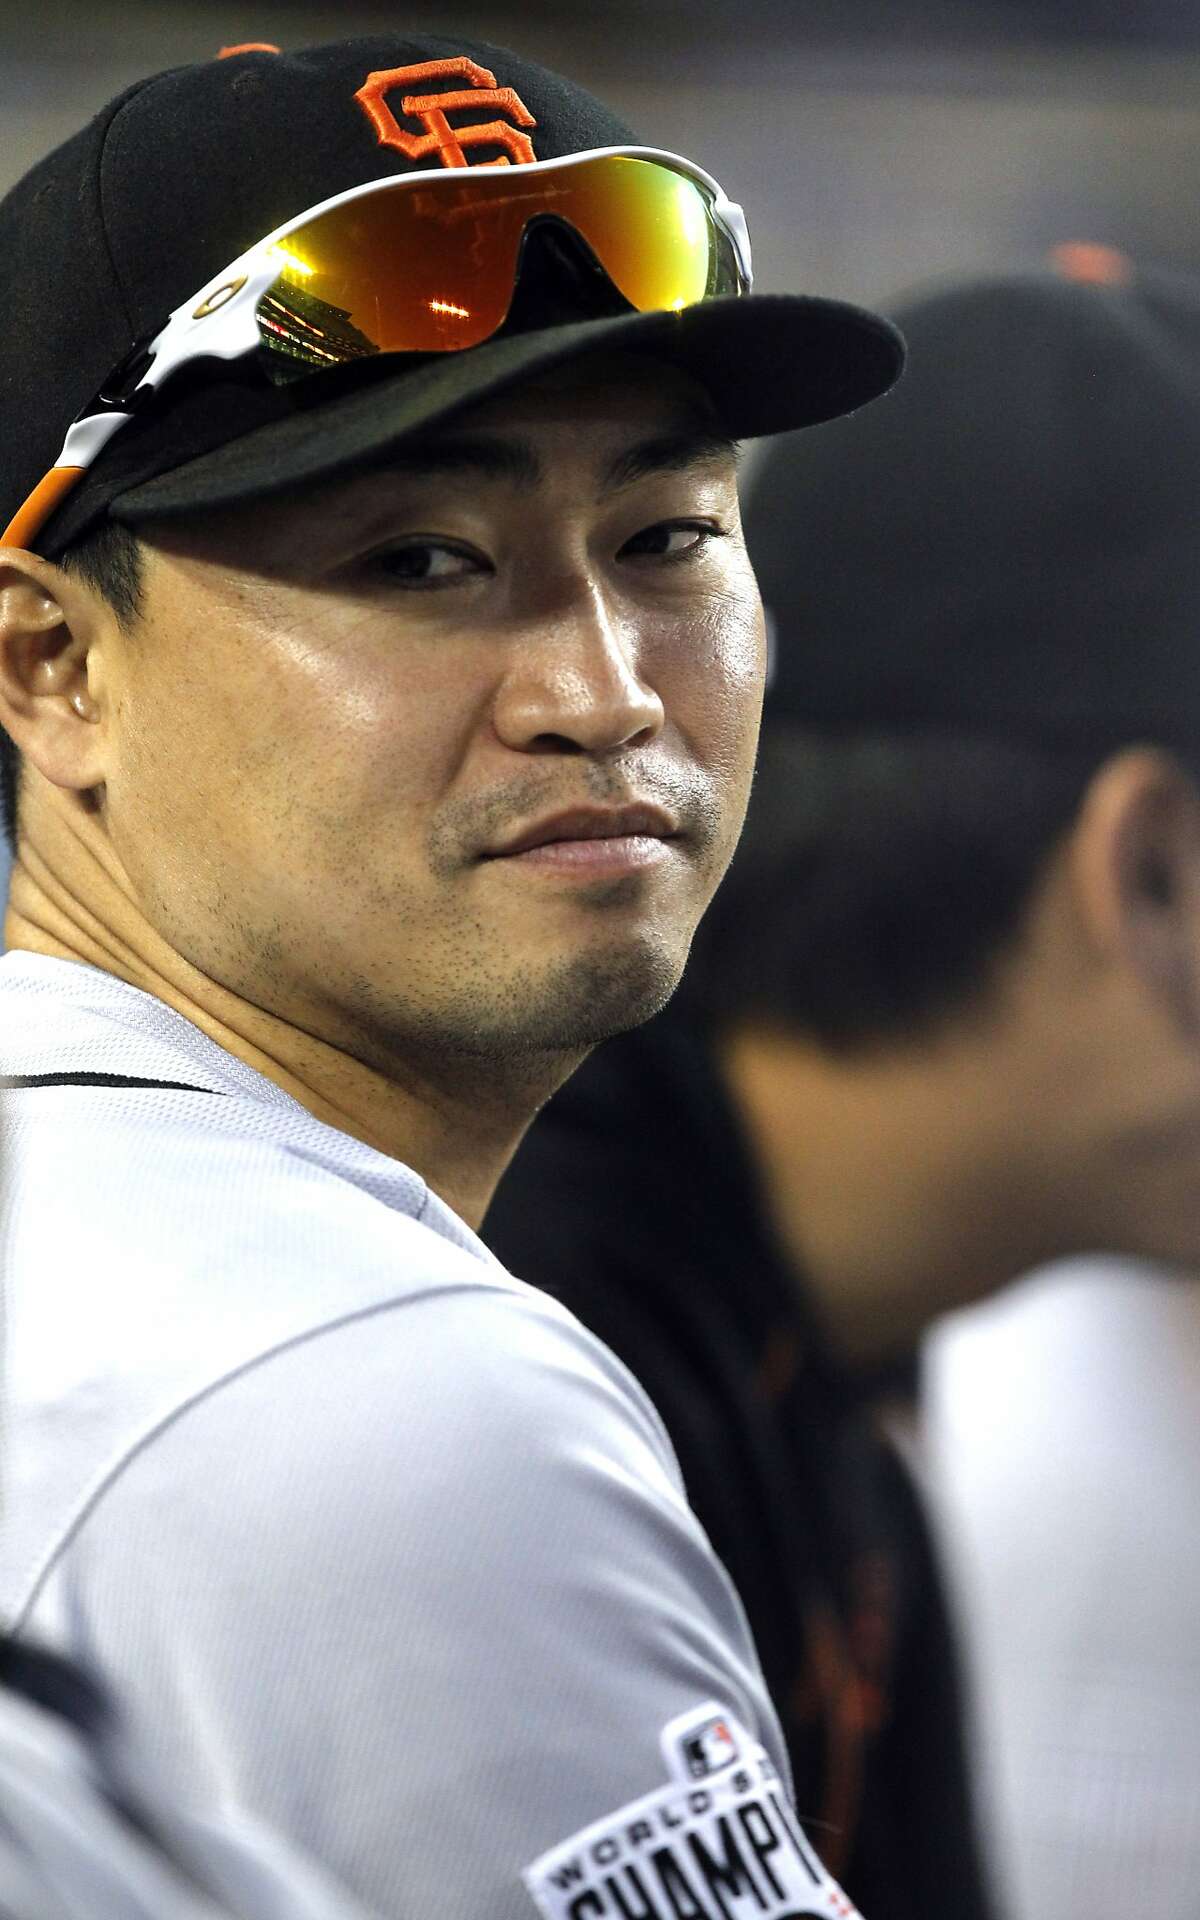 San Francisco Giants' Nori Aoki looks over during a baseball game against the Los Angeles Dodgers in Los Angeles, Sunday, June 21, 2015. (AP Photo/Alex Gallardo)